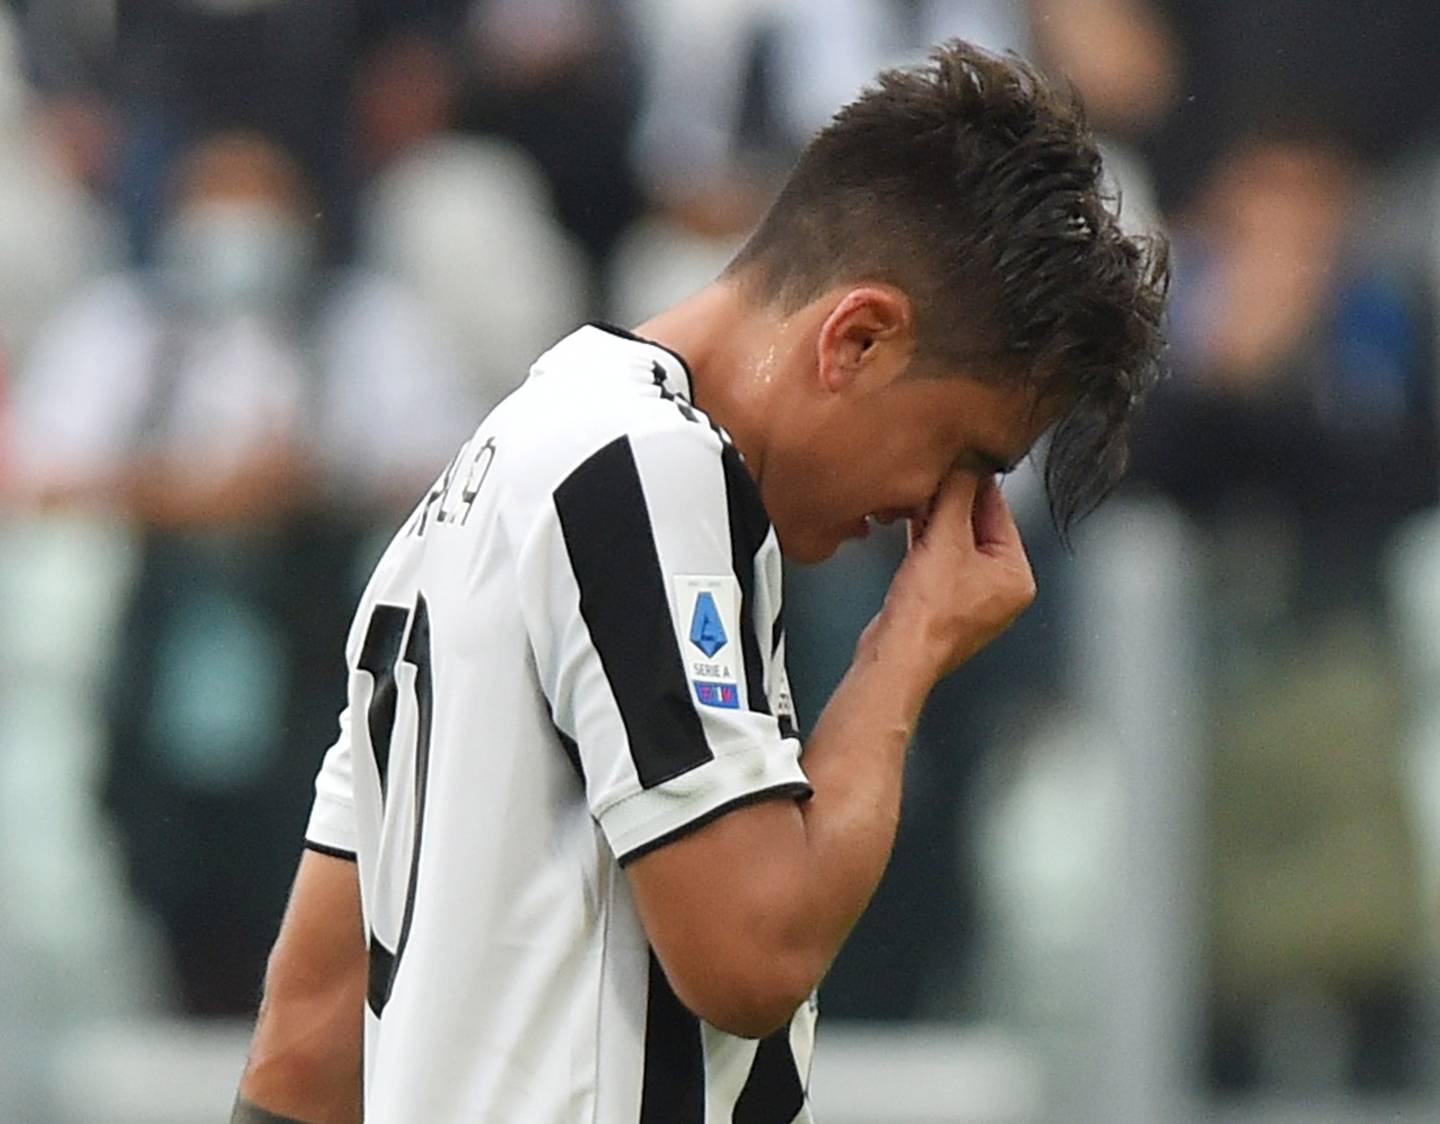 Juventus' Paulo Dybala looks dejected as he is substituted after sustaining an injury. Reuters